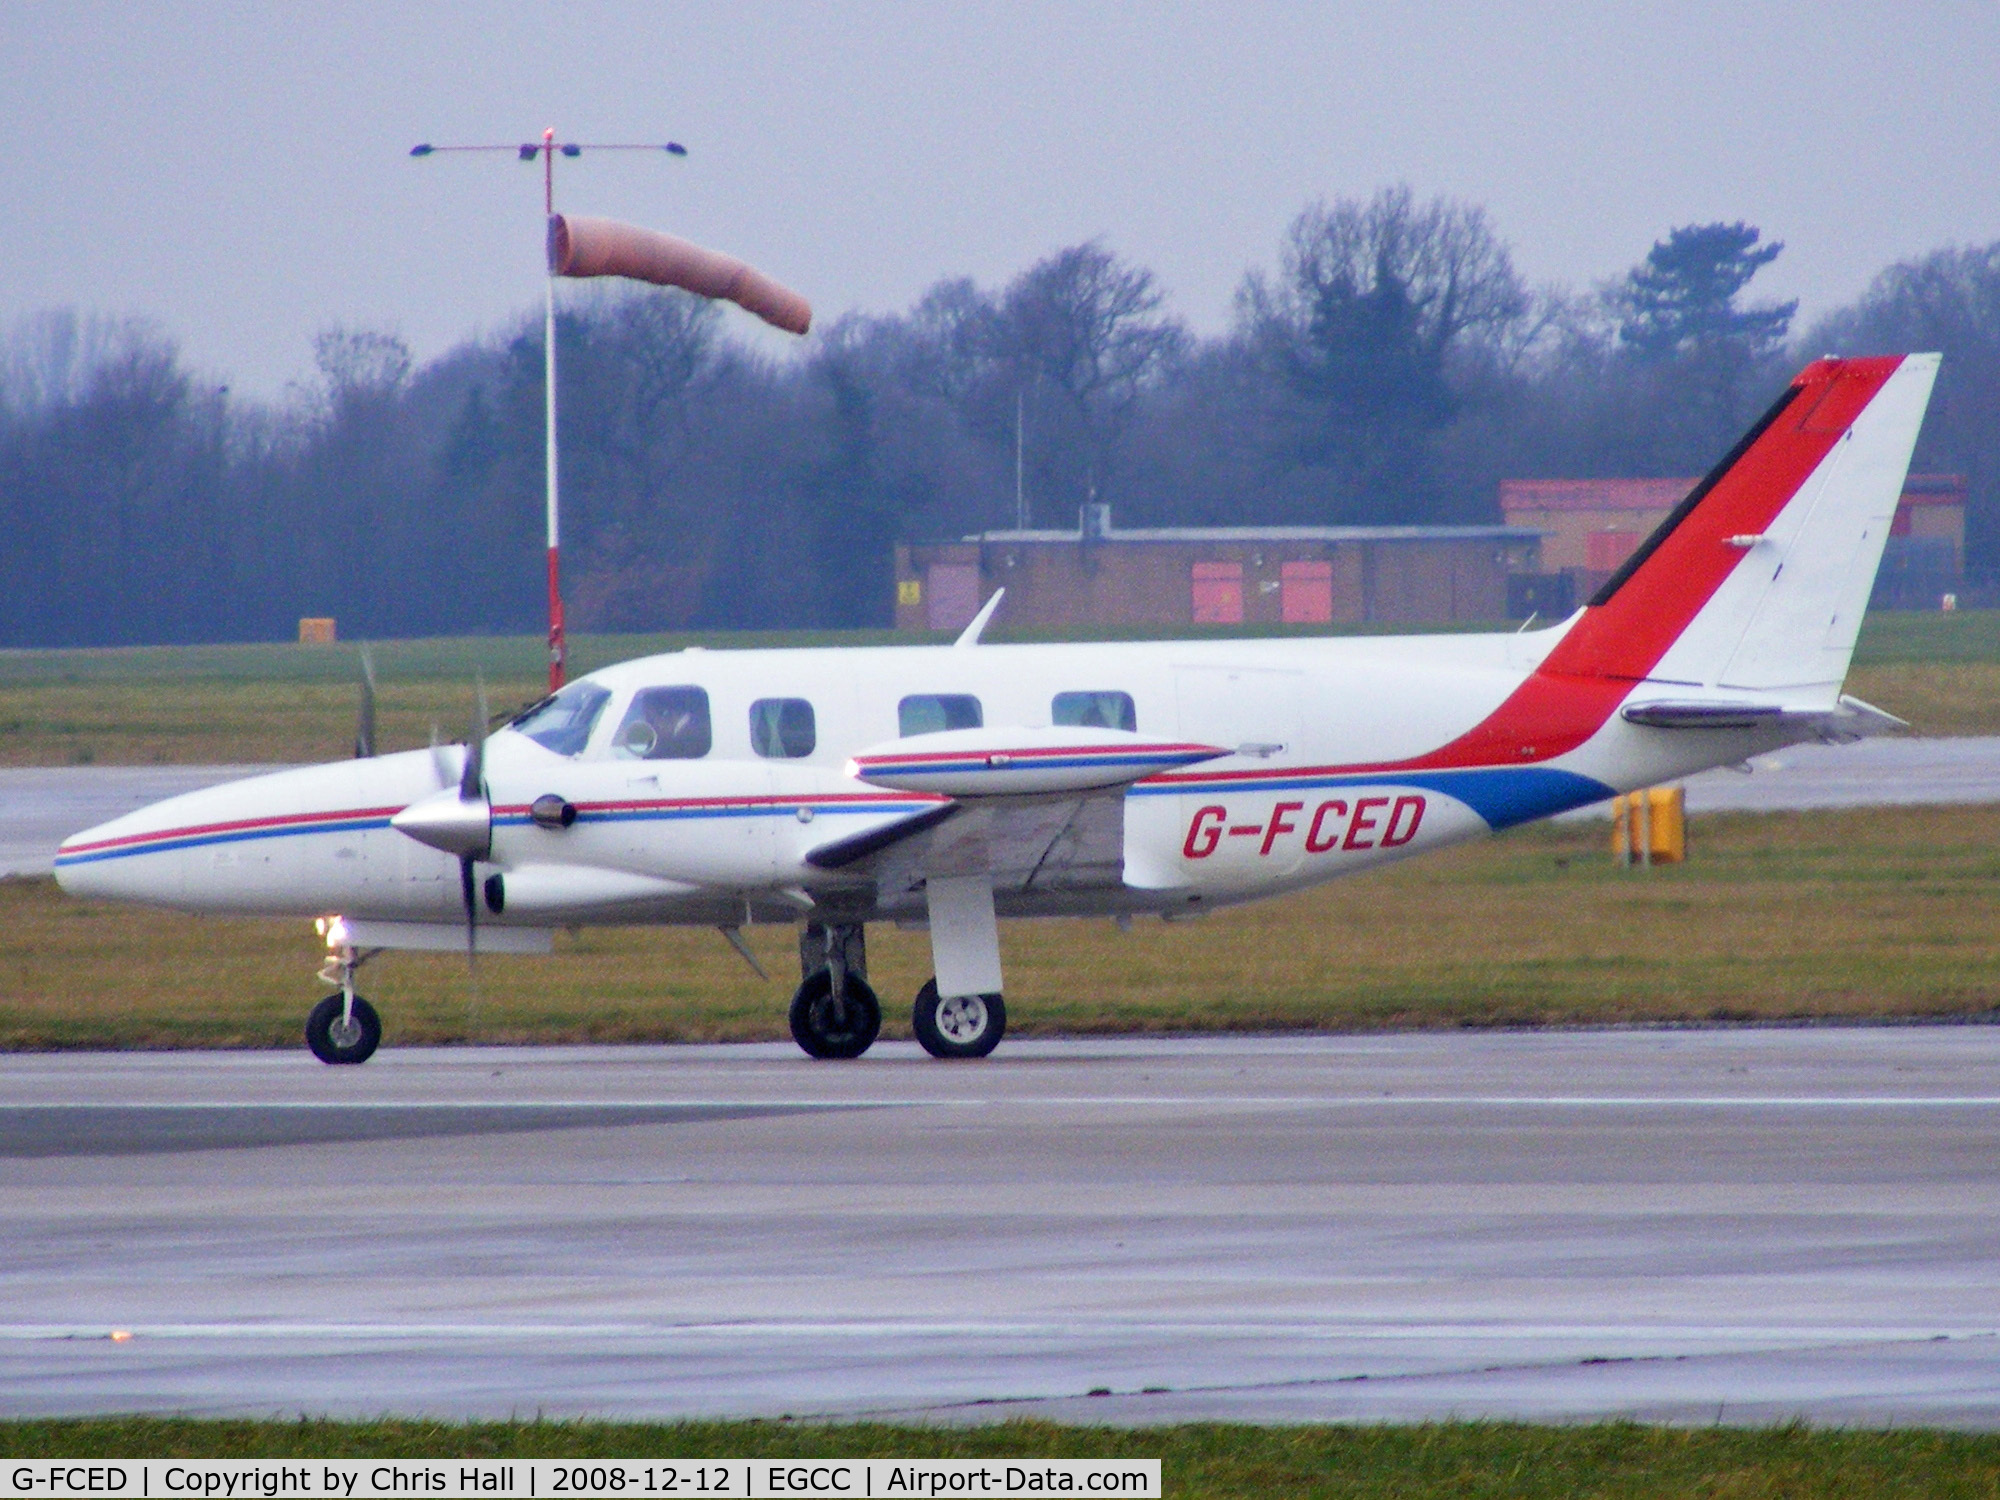 G-FCED, 1981 Piper PA-31T2-620 Cheyenne IIXL C/N 31T-8166013, departing from Manchester